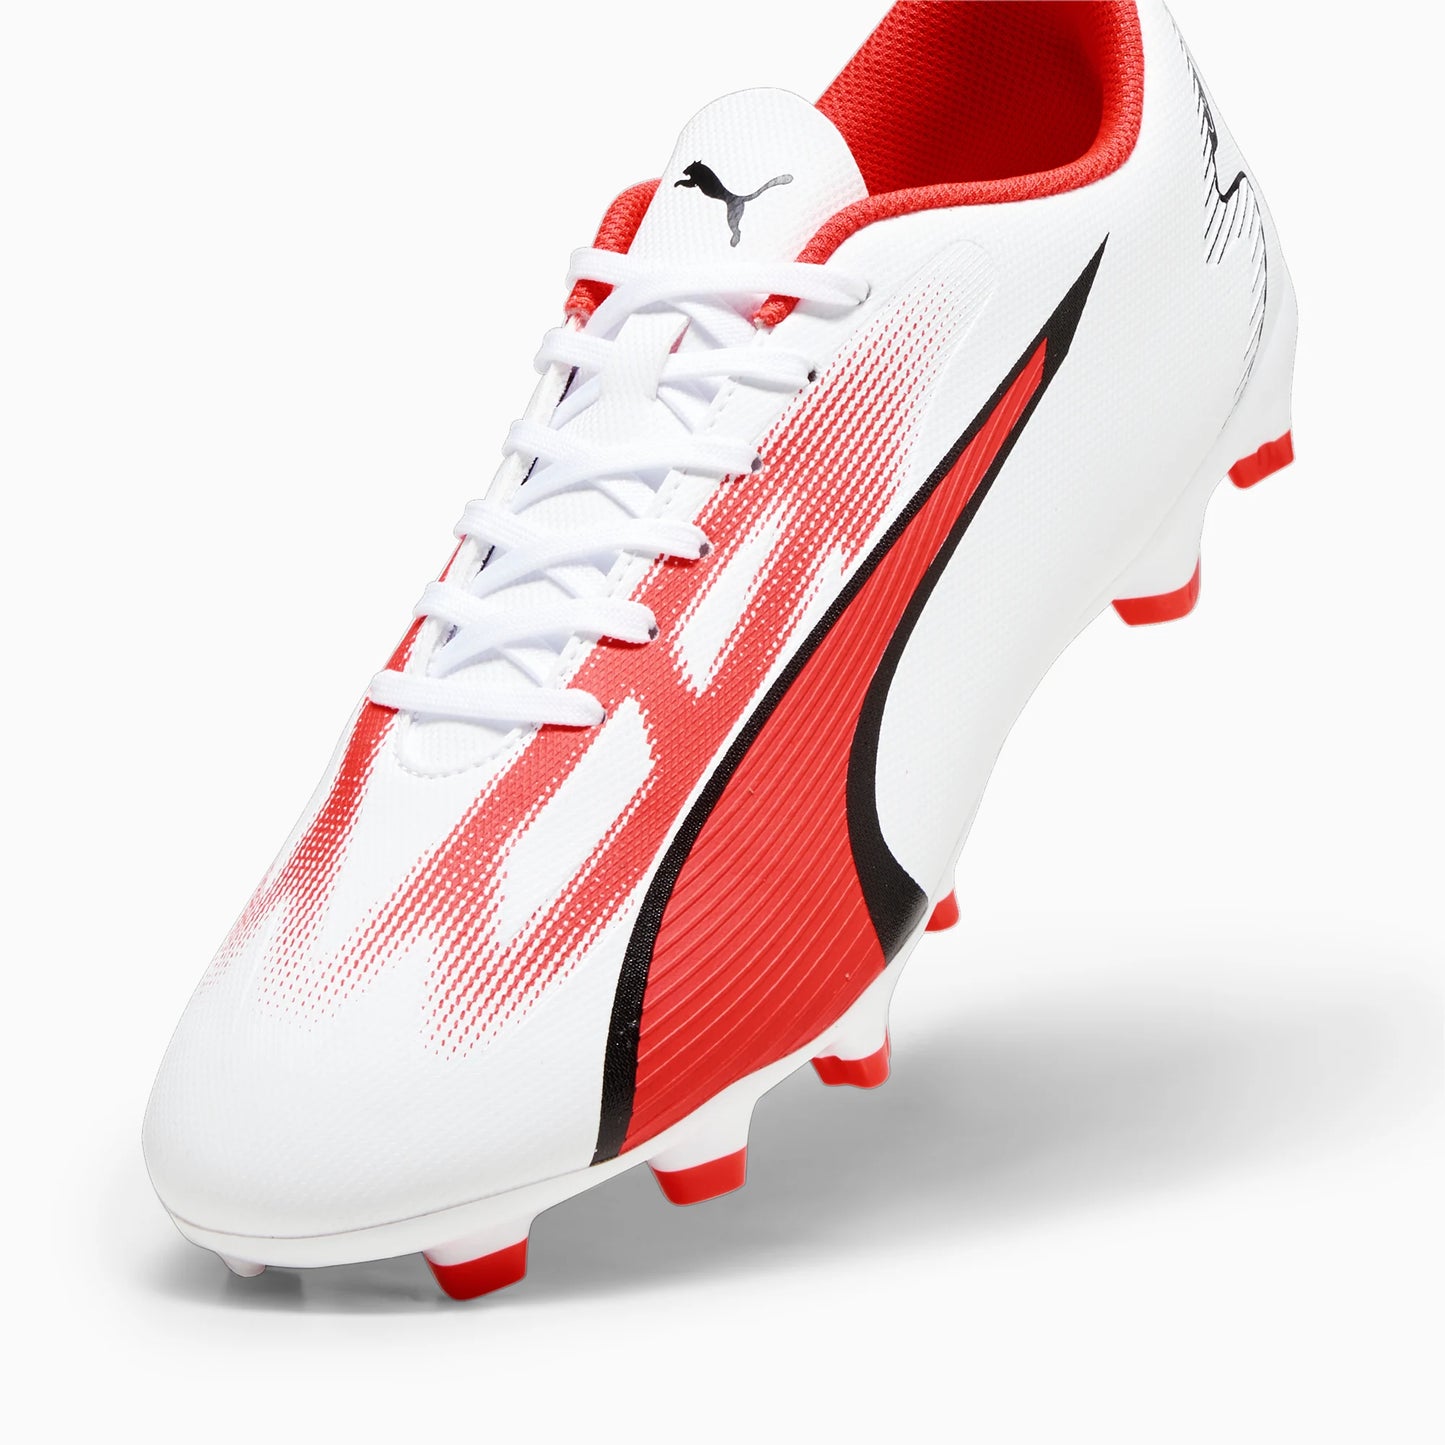 - Puma ULTRA PLAY FG/AG Men's Football Boots White Fire Orchid - (107423 01) - UP6 - R2L17